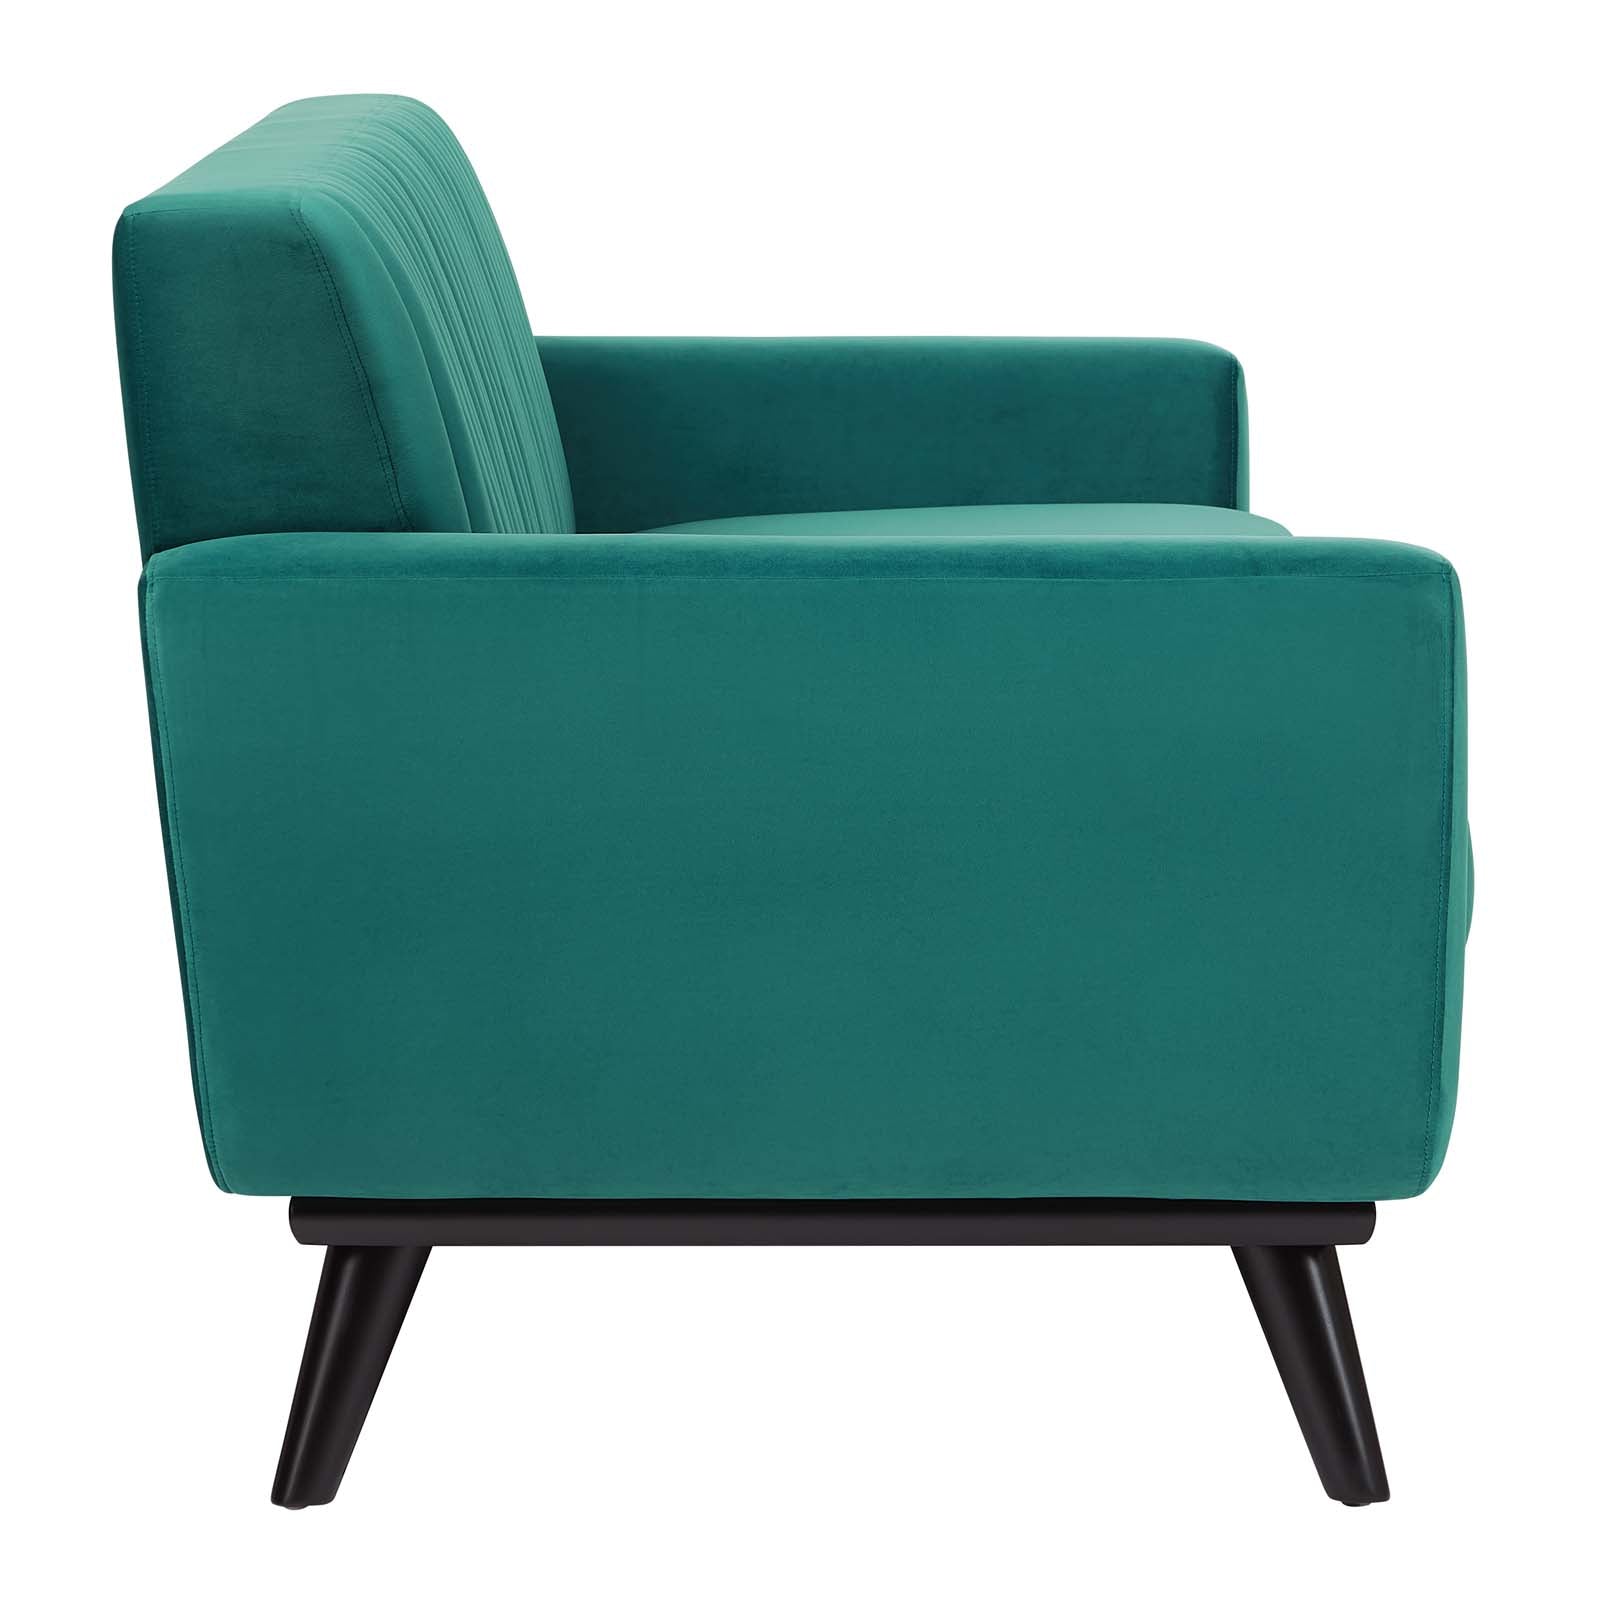 Modway Sofas & Couches - Engage Channel Tufted Performance Velvet Sofa Teal